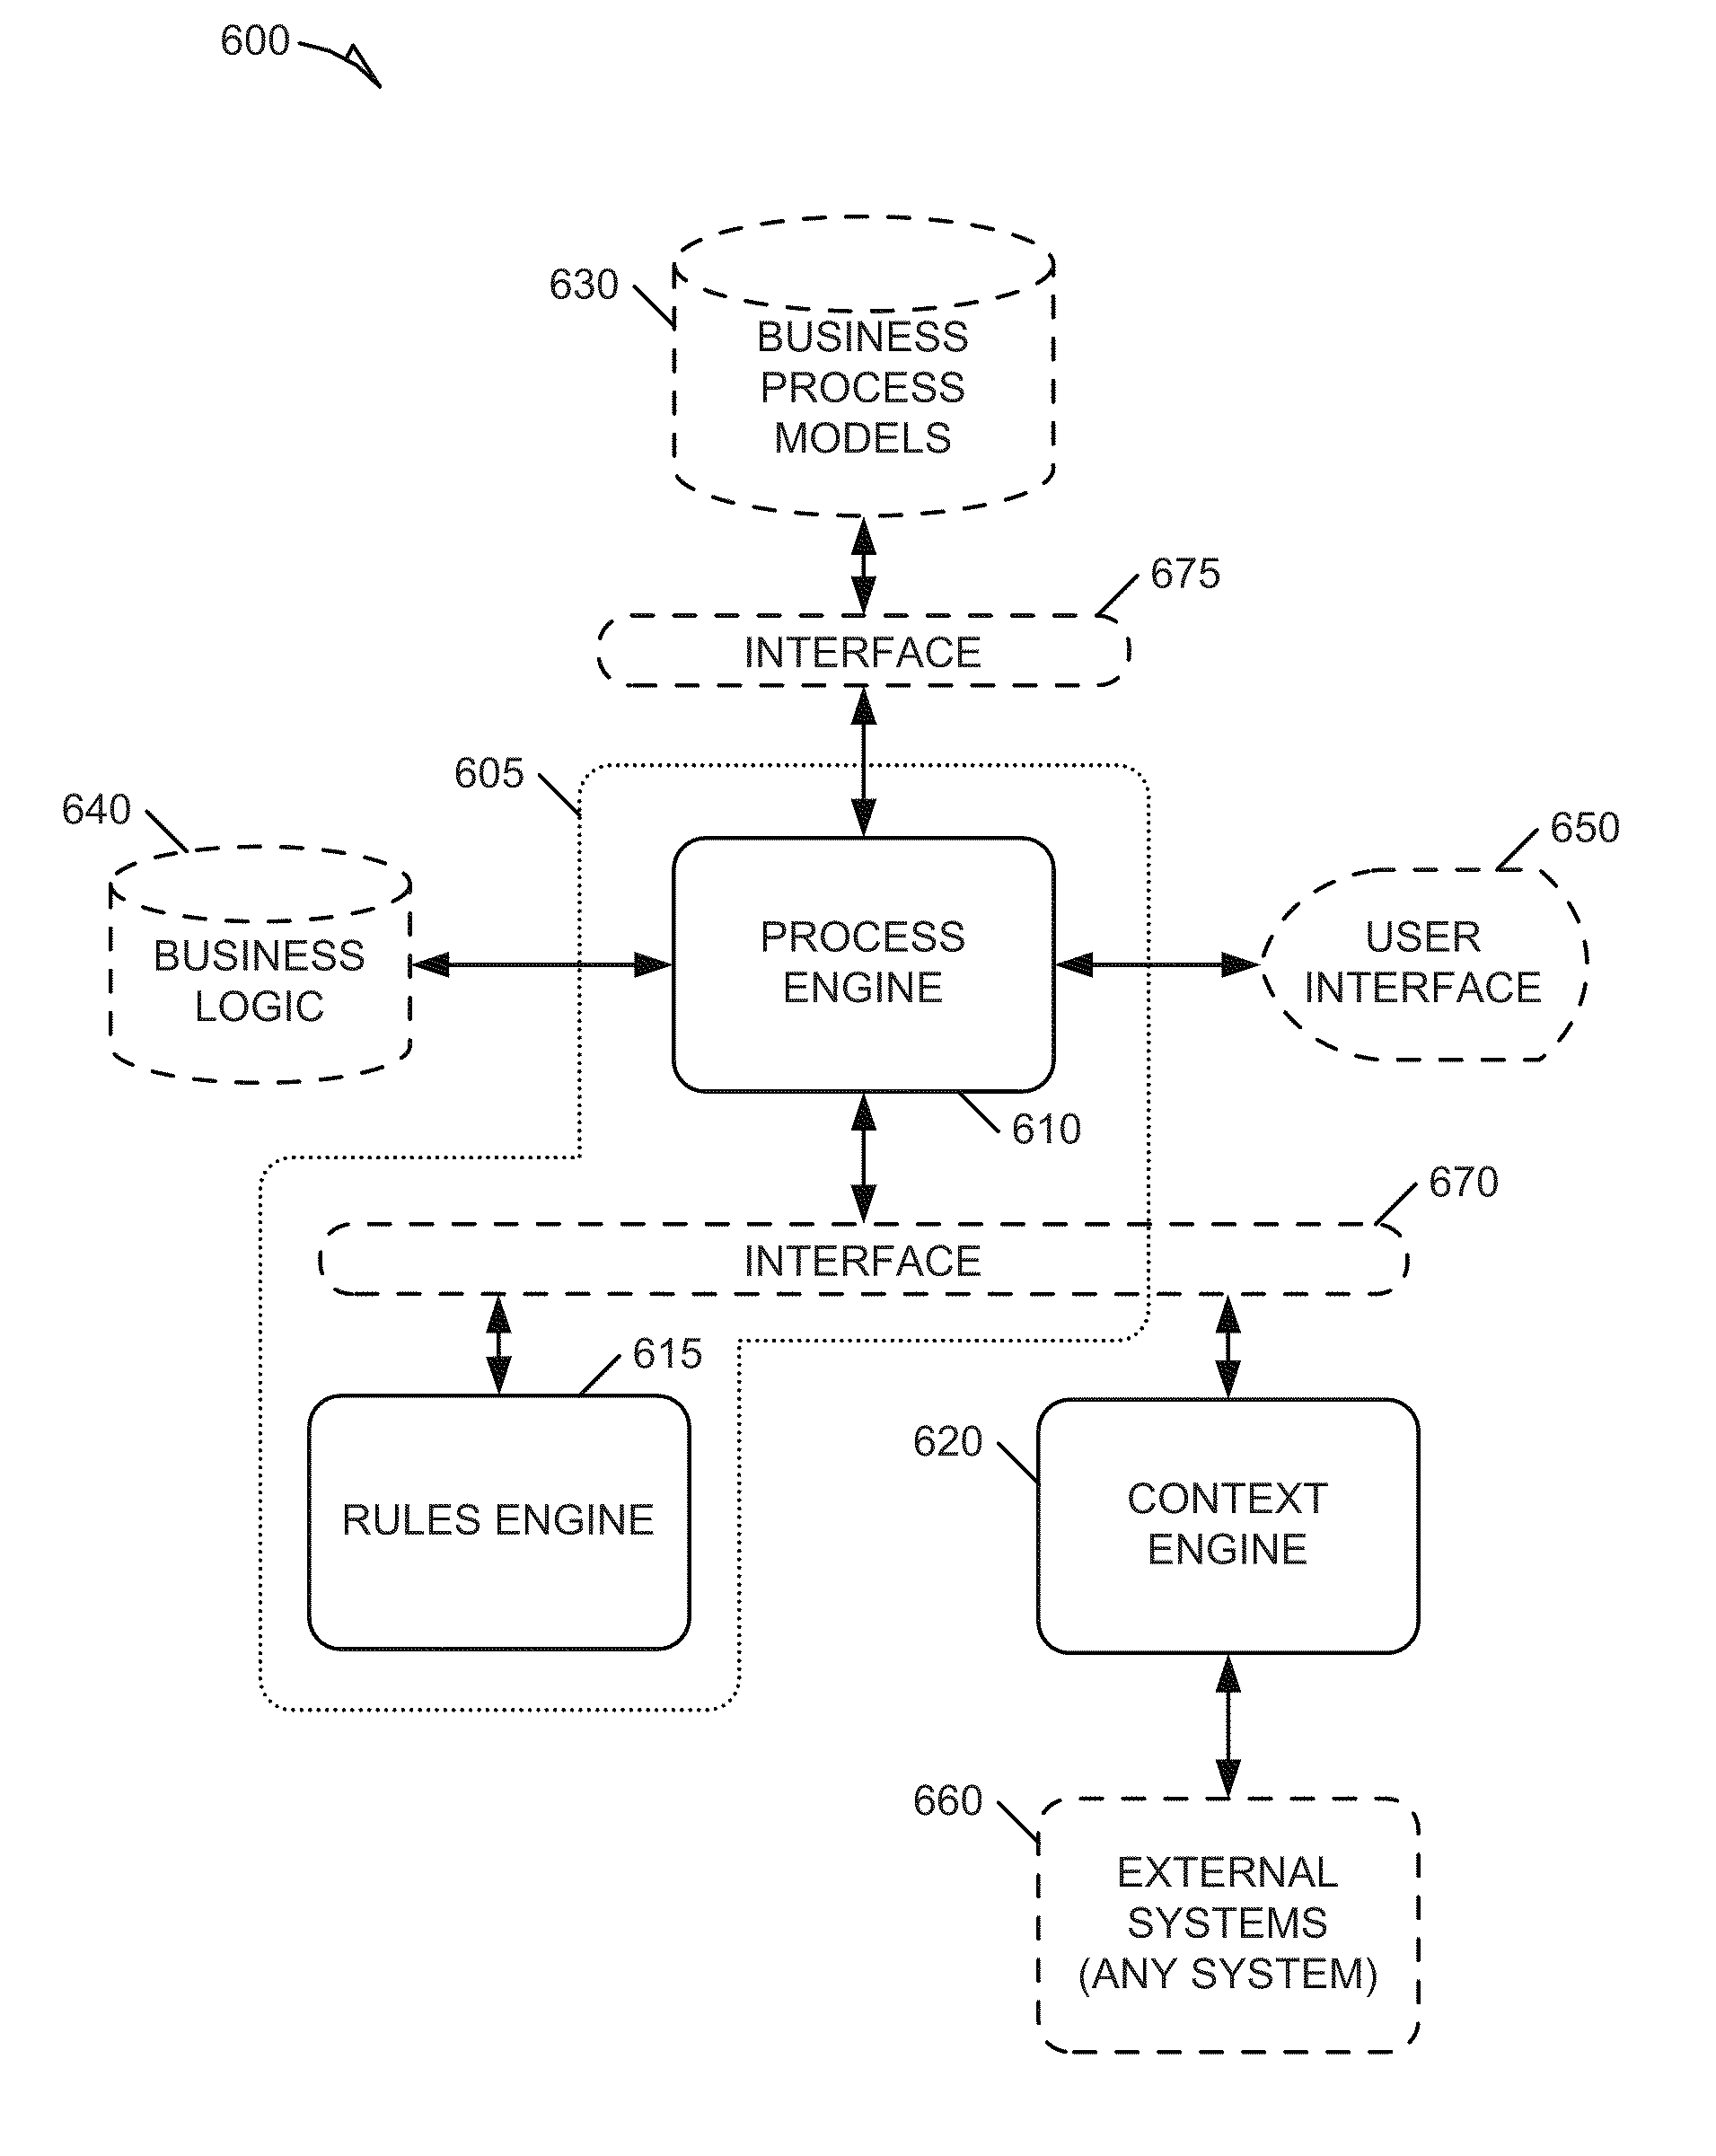 Systems and methods for dynamic process model configuration based on process execution context